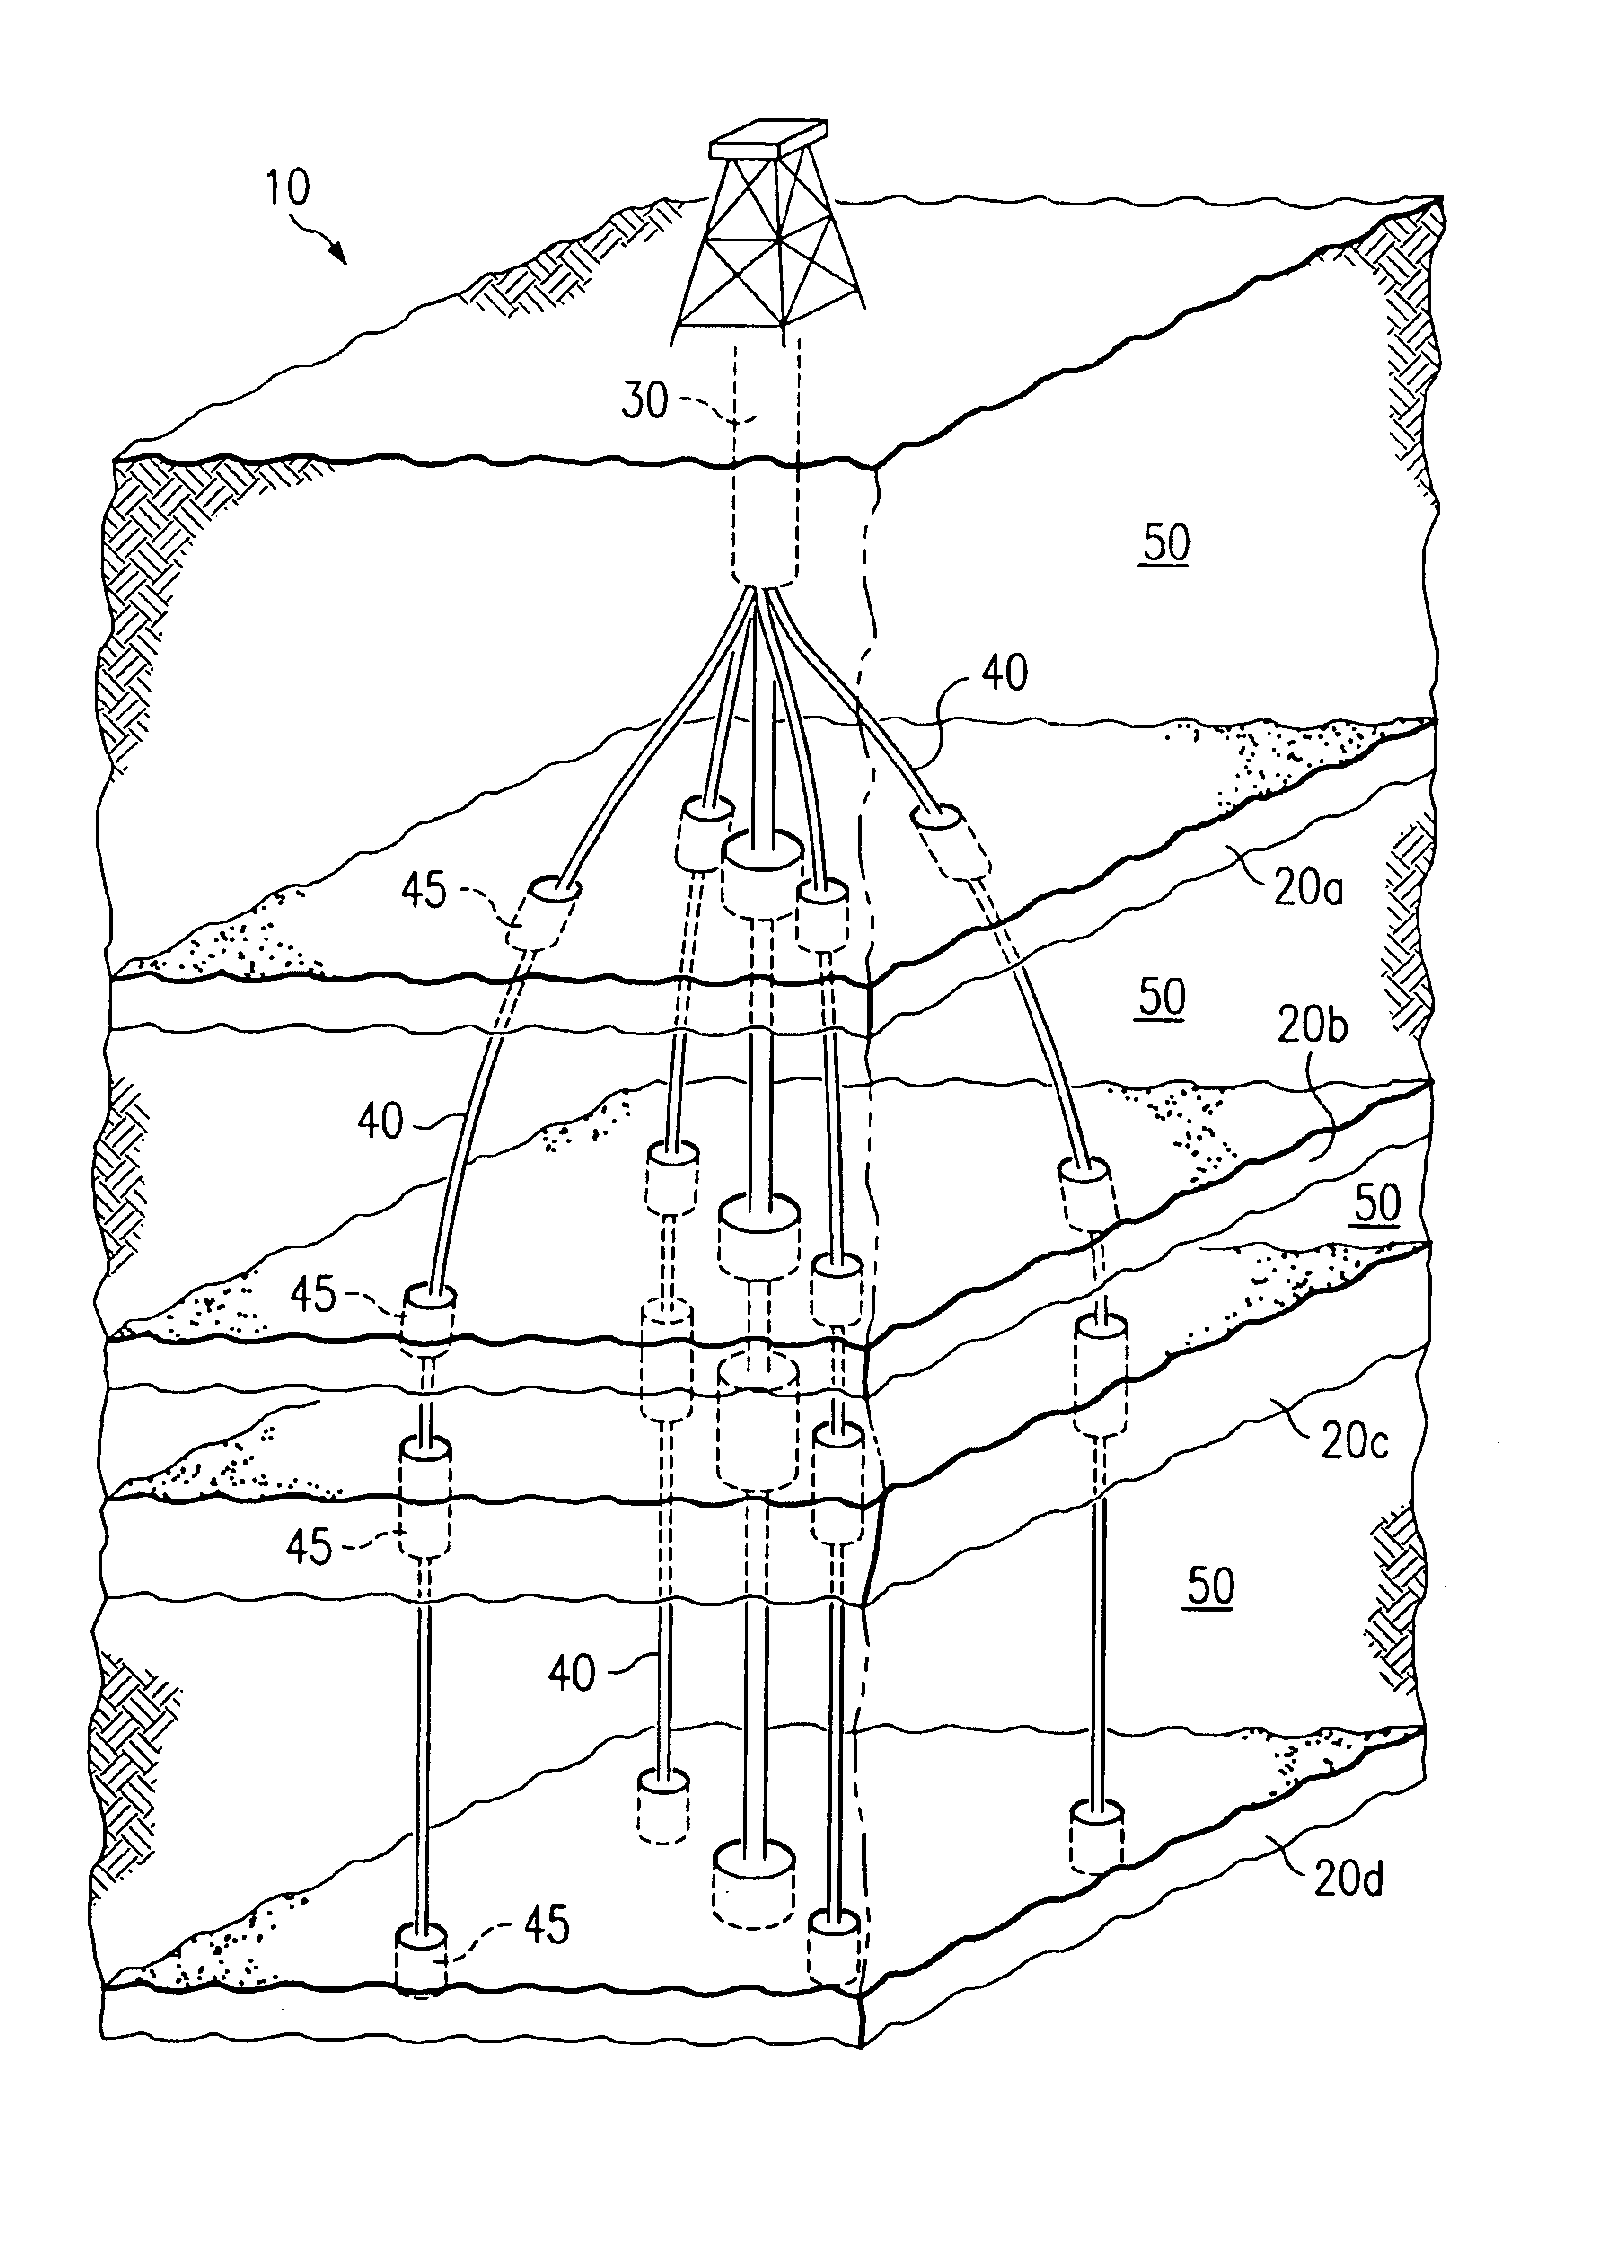 Three-dimensional well system for accessing subterranean zones